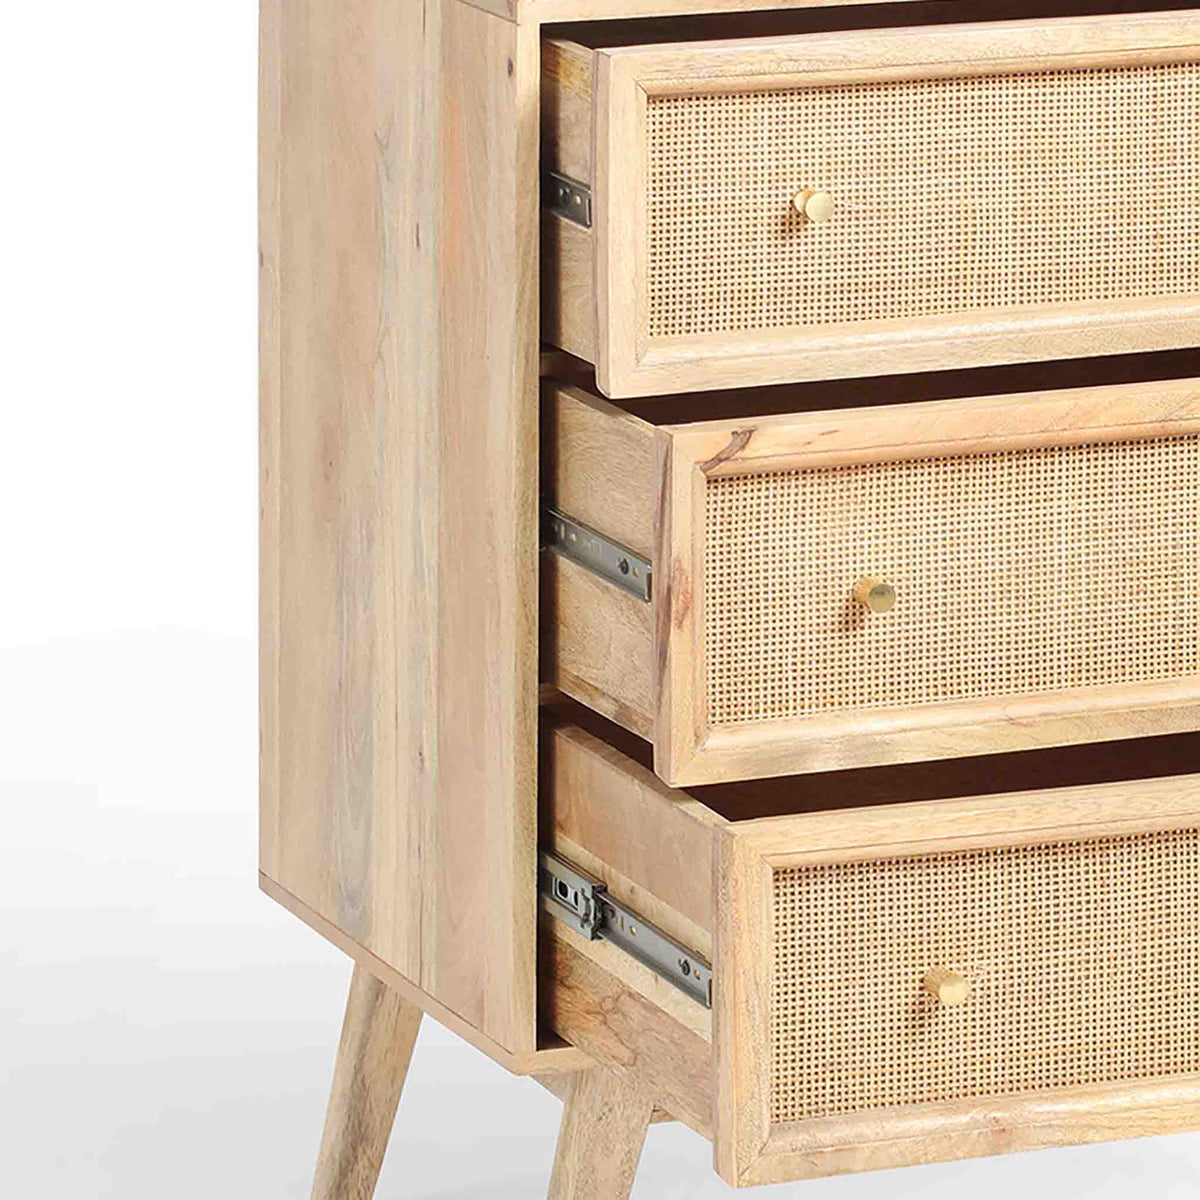 Venti Natural Mango Wood & Cane Compact 3 Drawer Chest on runners